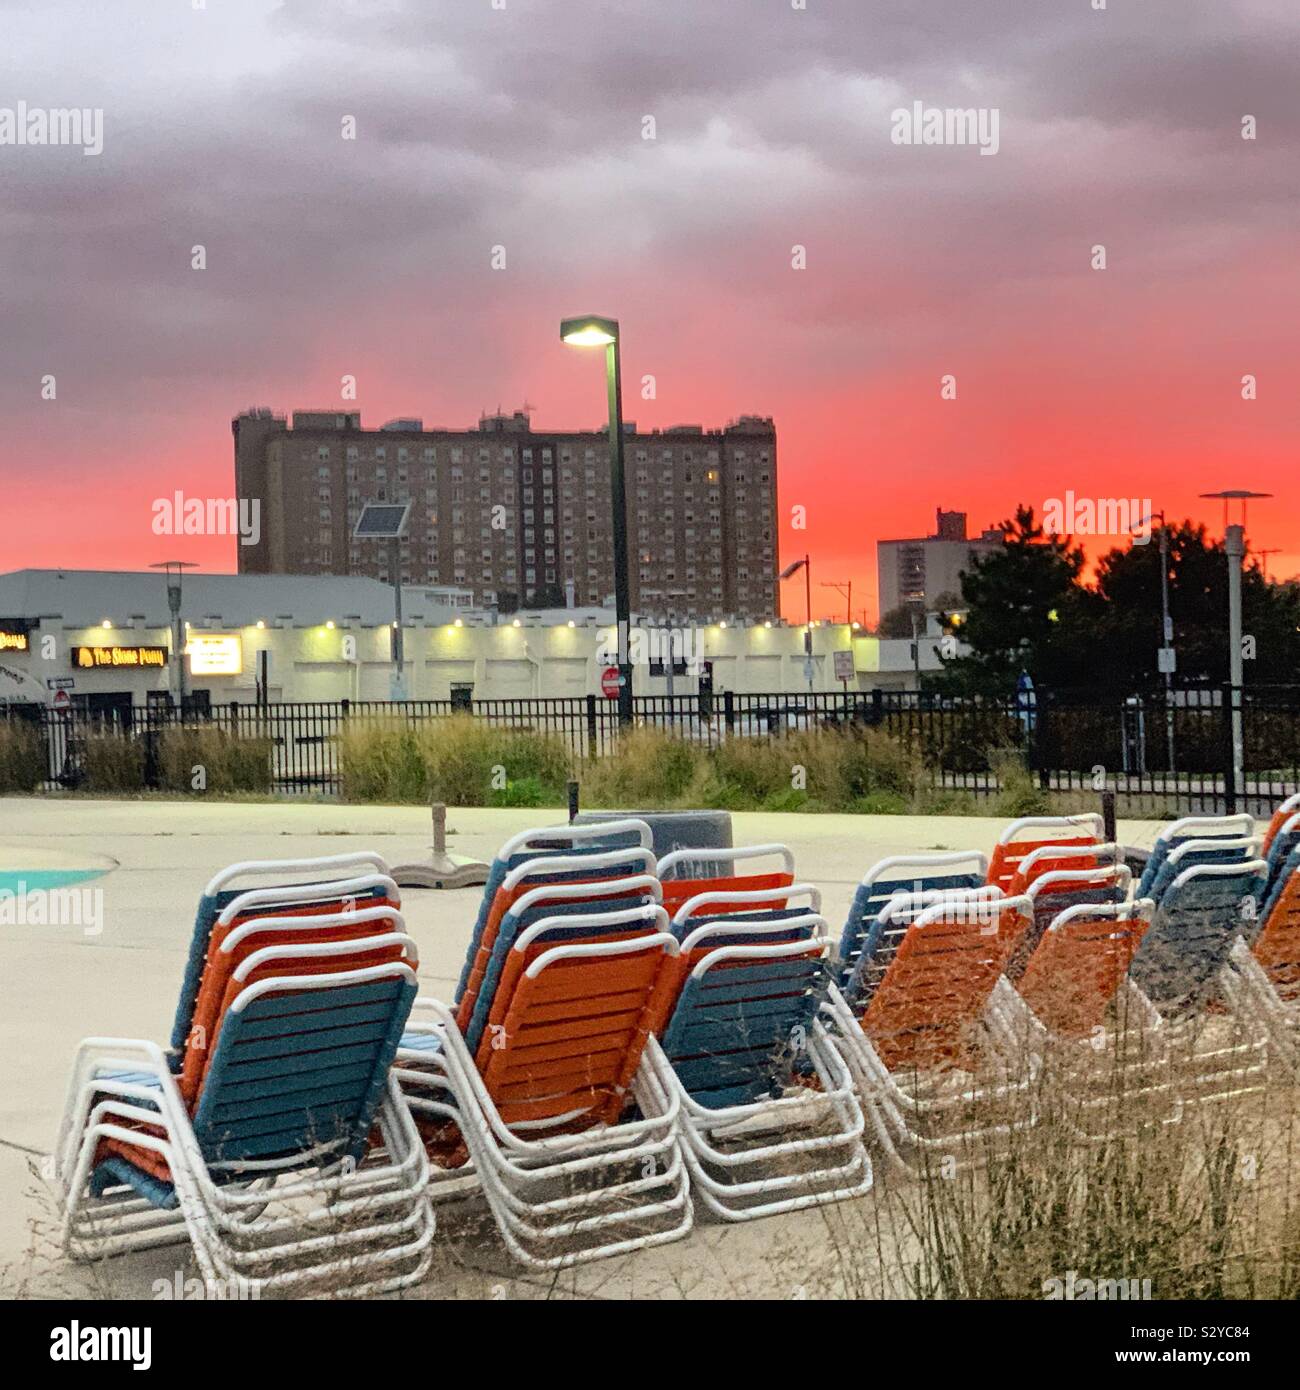 Sonnenuntergang, Asbury Park, Monmouth County, New Jersey, United States Stockfoto